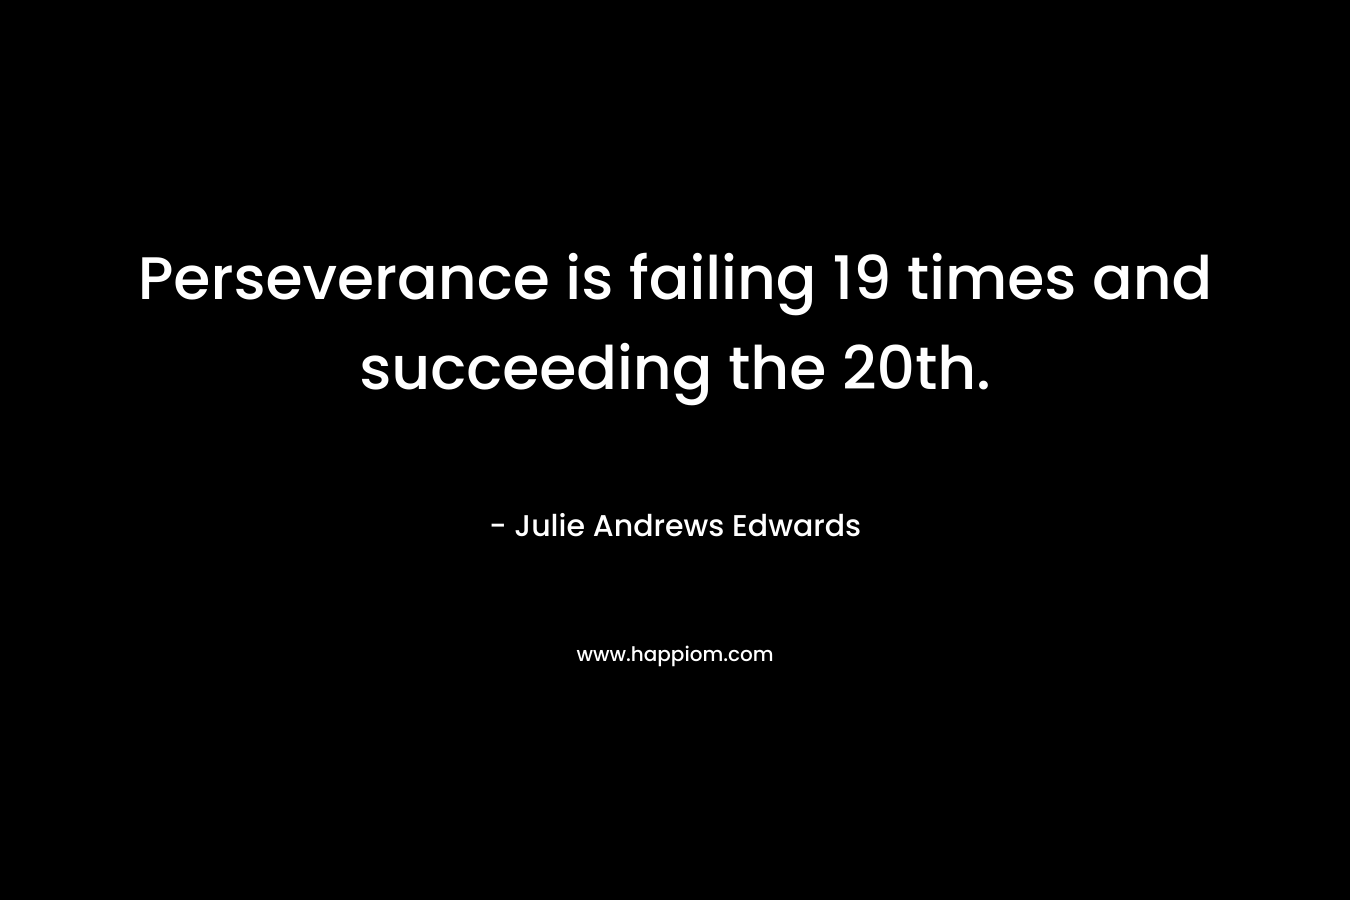 Perseverance is failing 19 times and succeeding the 20th. – Julie Andrews Edwards